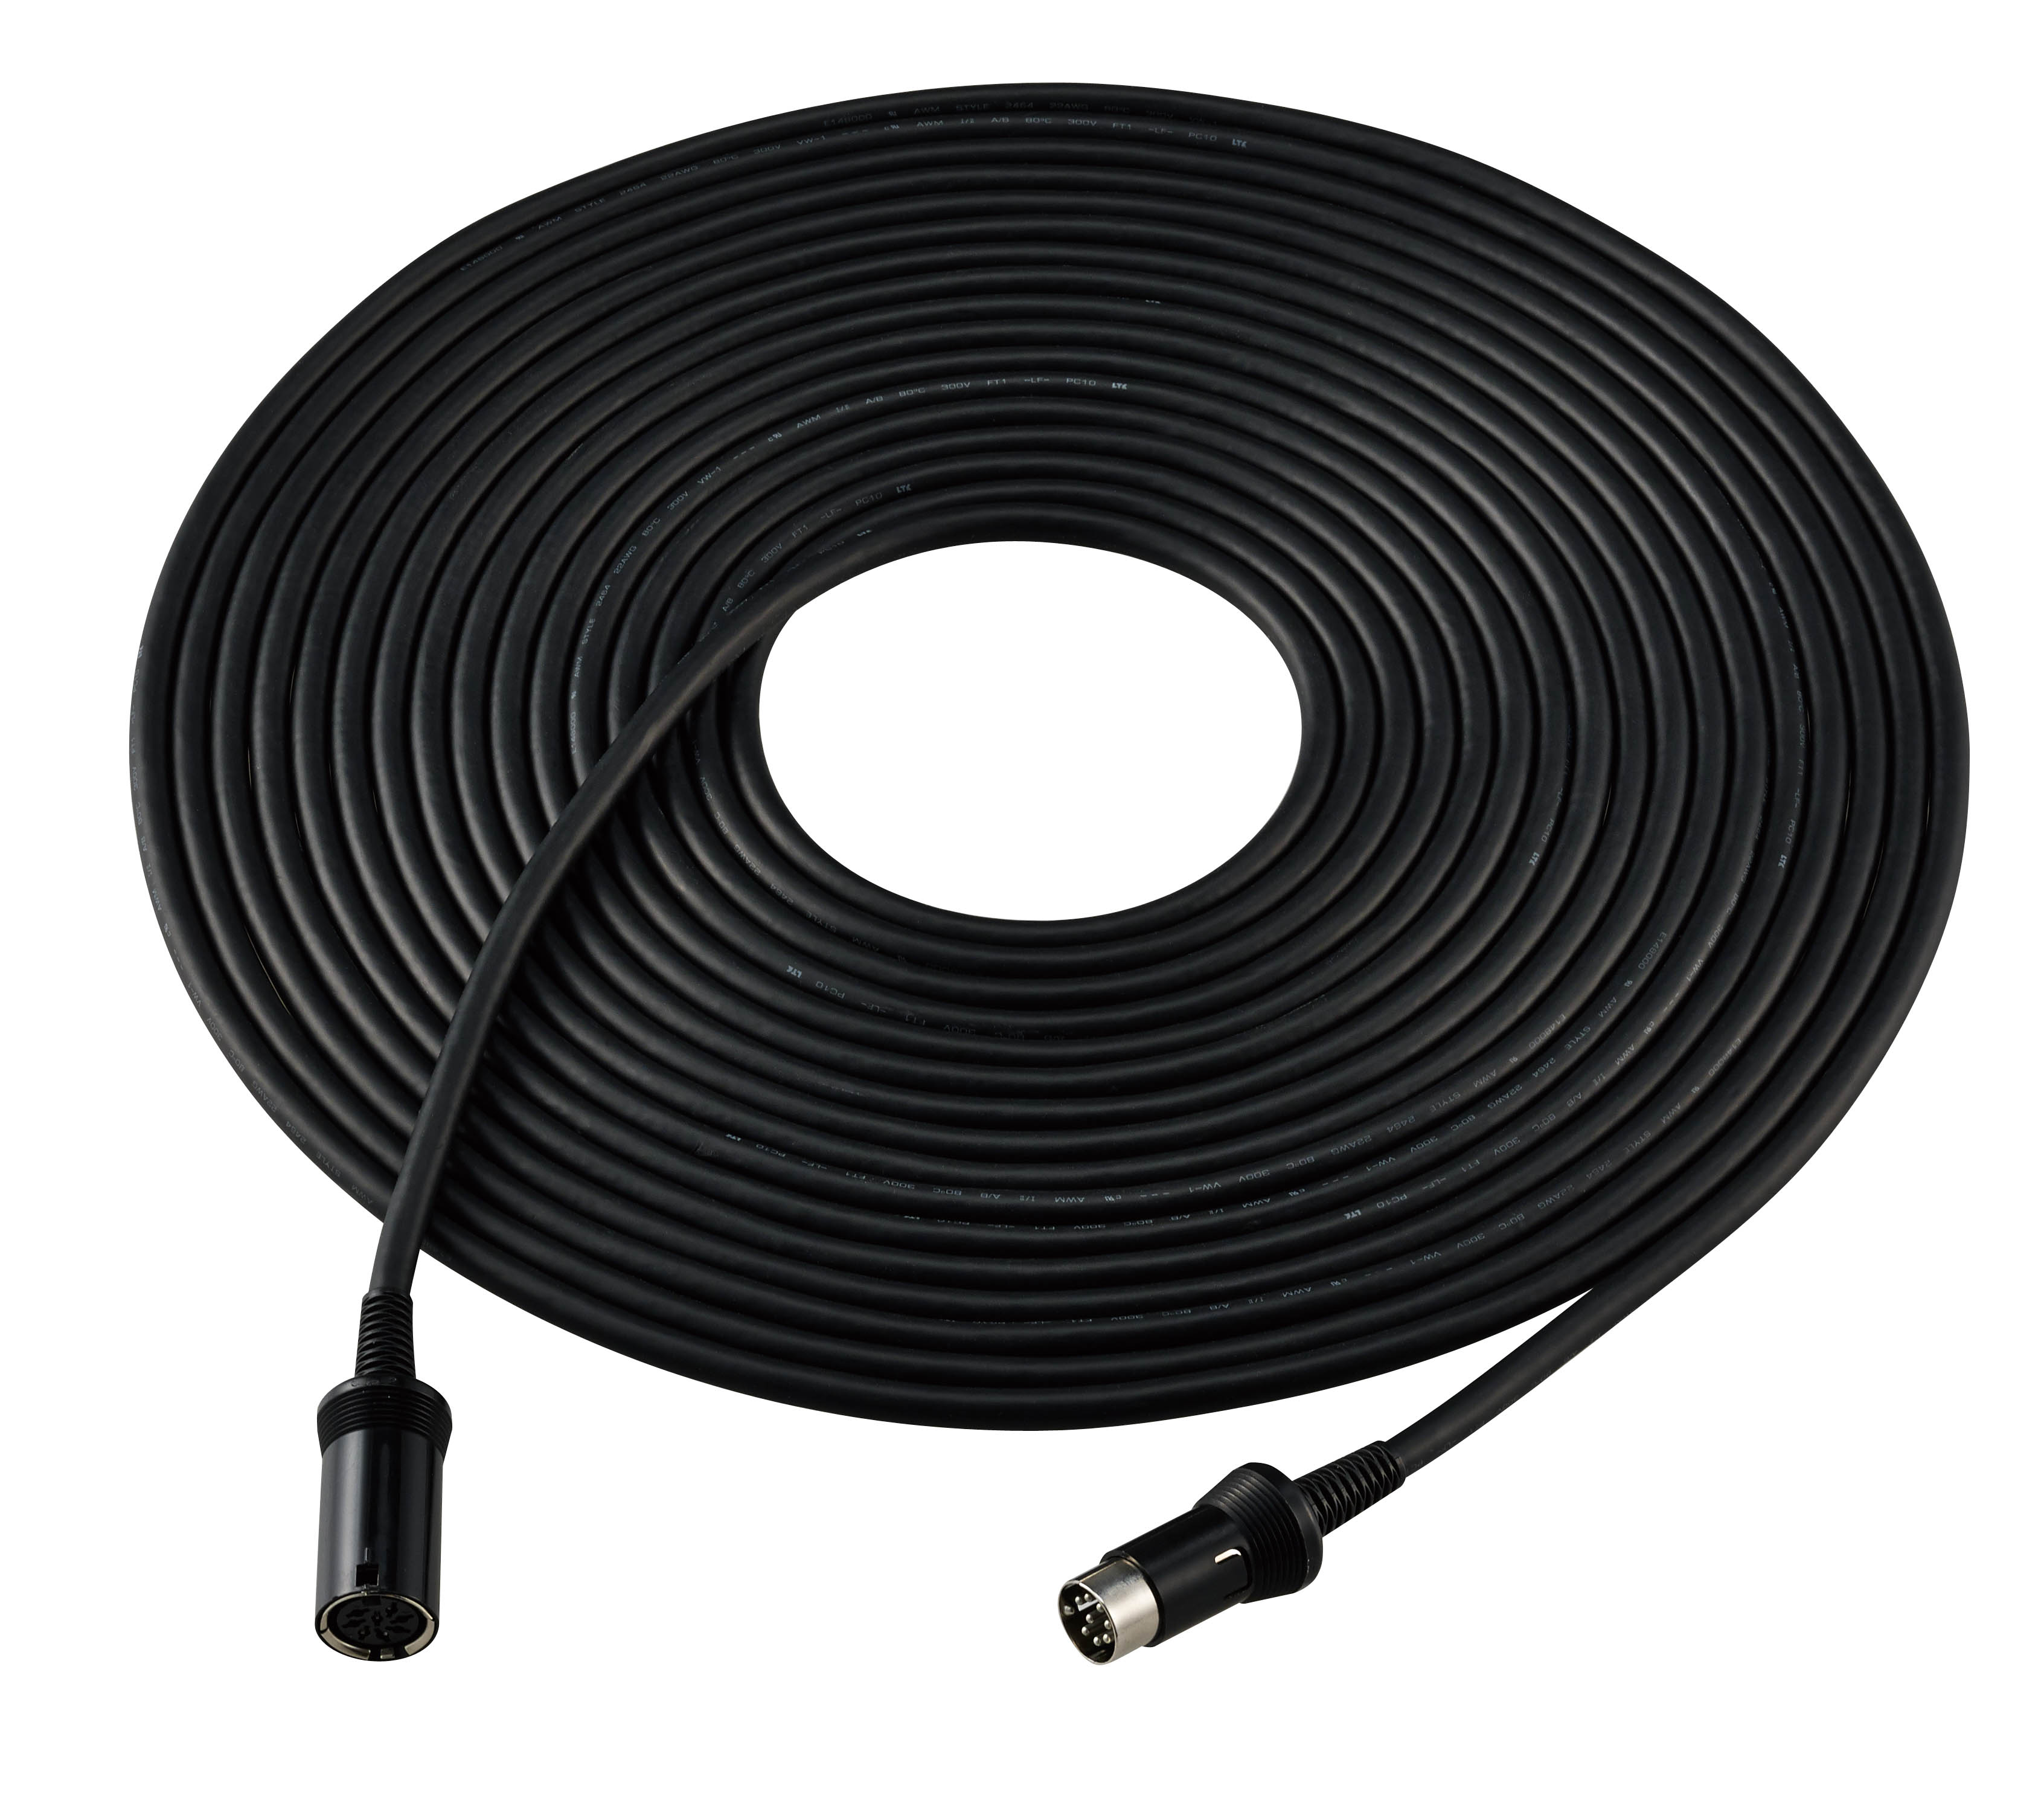  Cable kết nối TOA YR-780-10M 